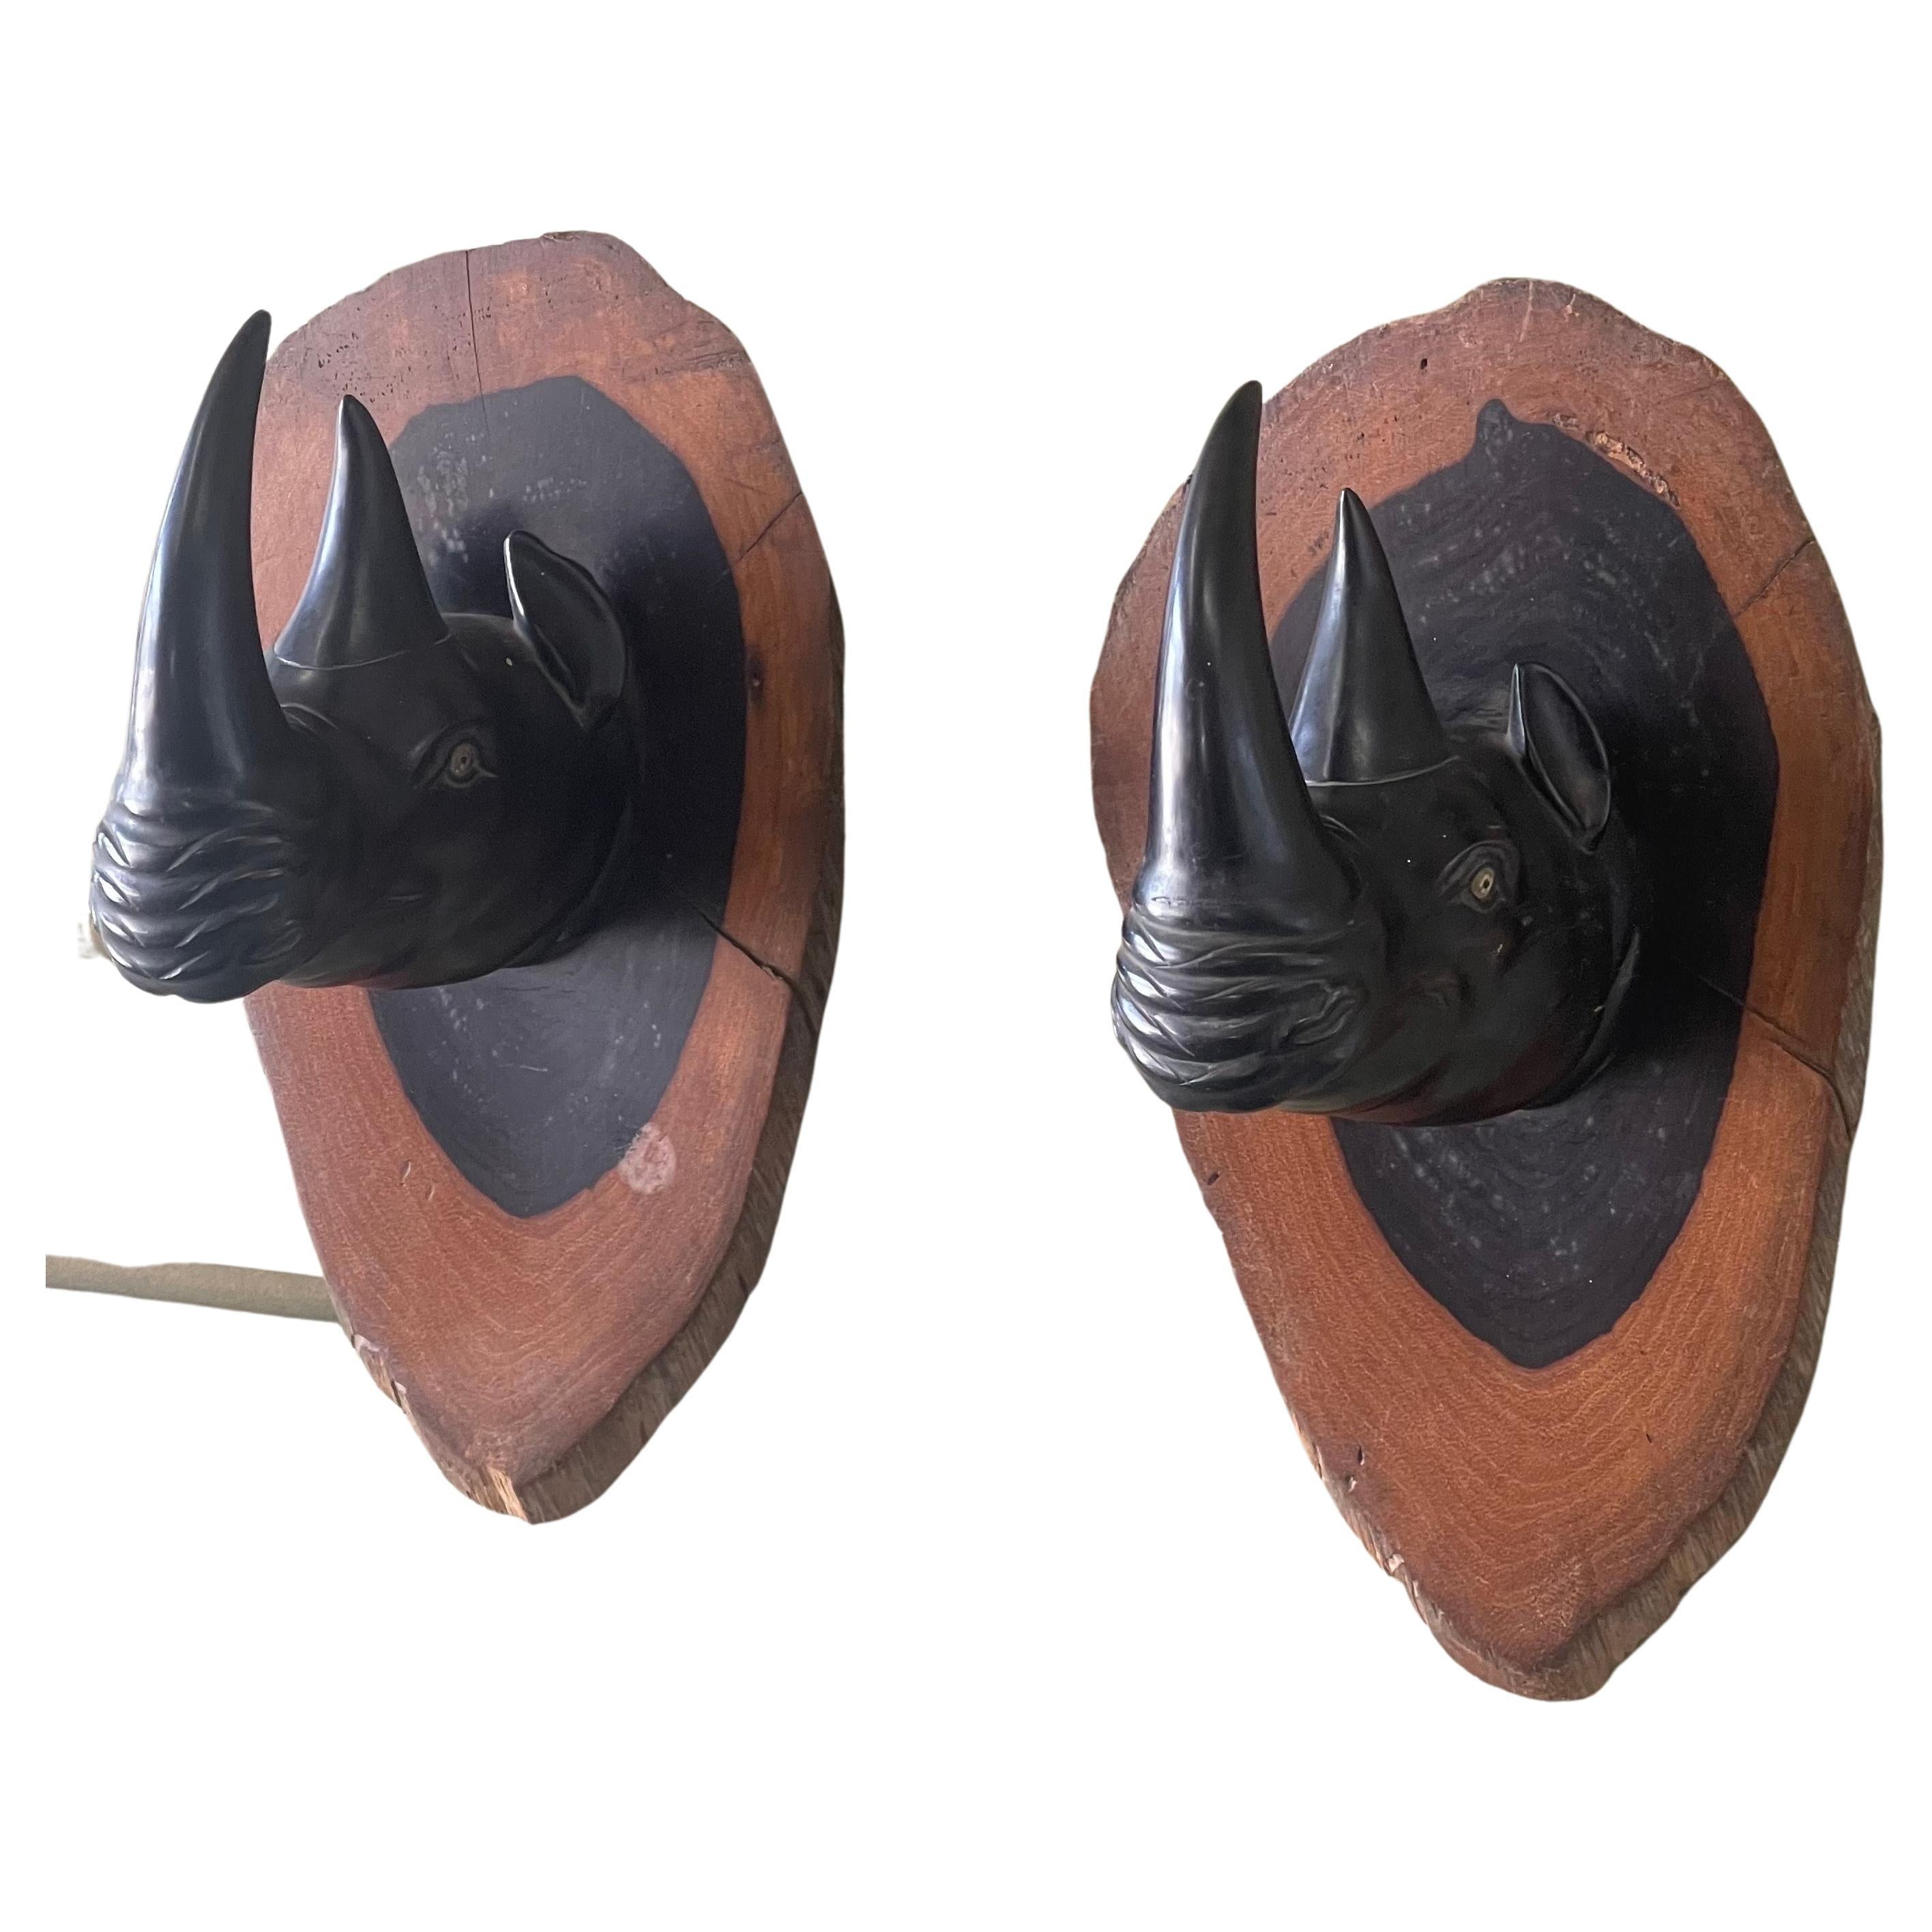 Incredibly detailed pair of hand carved ebony rhino / rhinoceros wall plaques / sculptures with glass eyes on a two tone African hardwood, circa 1970s. The plaques are extremely well made and solid; there is a metal wall hanger on the back of each